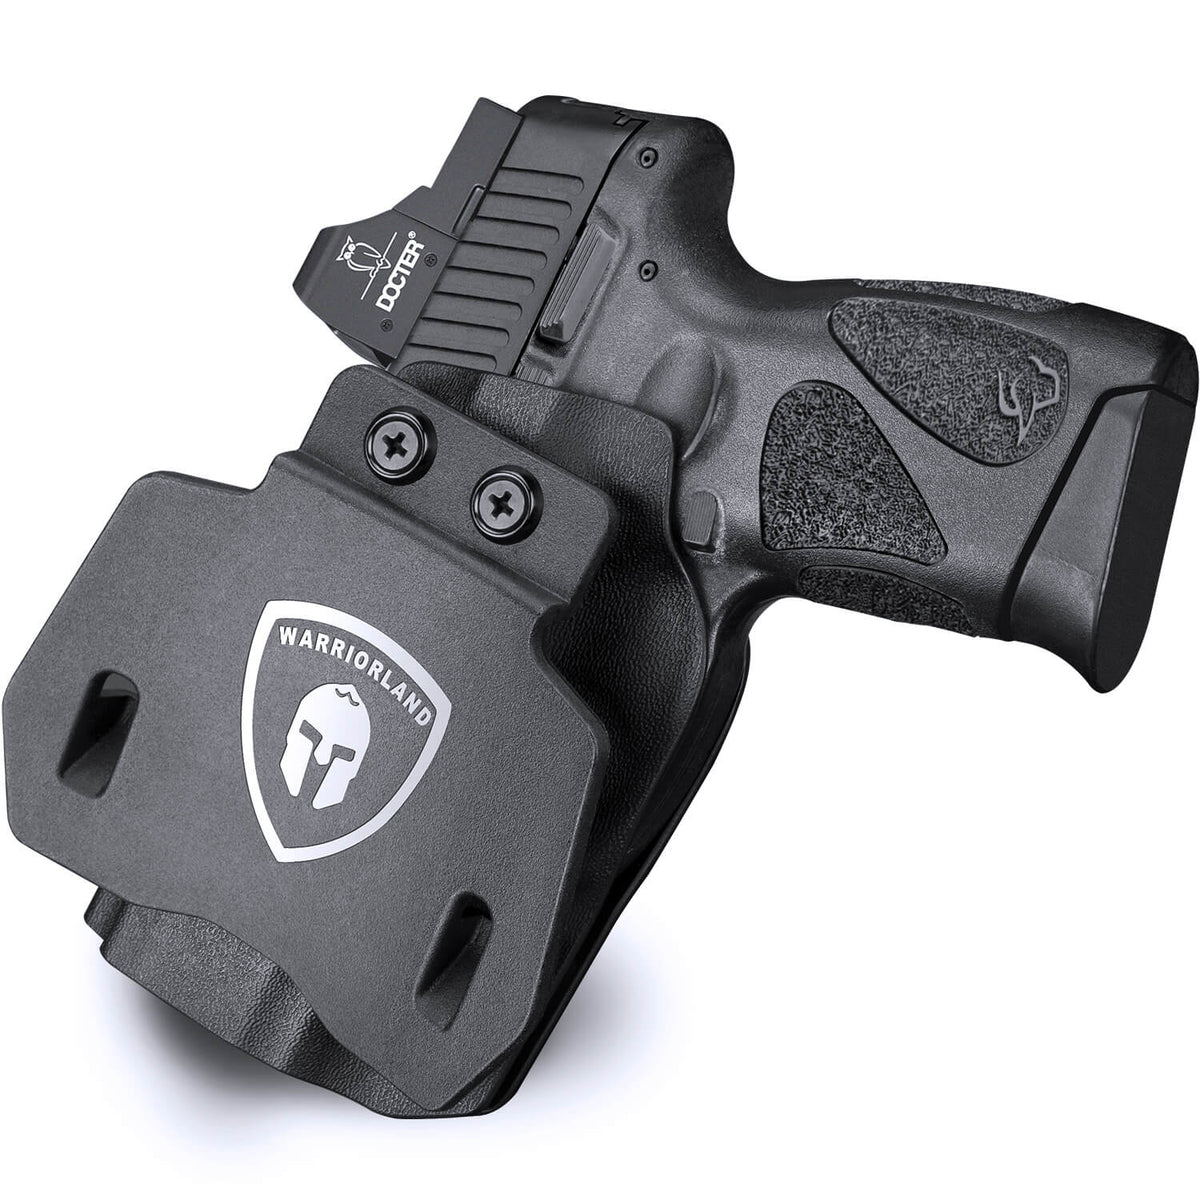 Taurus G2C G3C Millennium G2 PT111 PT140 OWB Open Carry Kydex Paddle Holster with Red Dot Optics Cut Trigger Guard Right/ Left Handed | WARRIORLAND